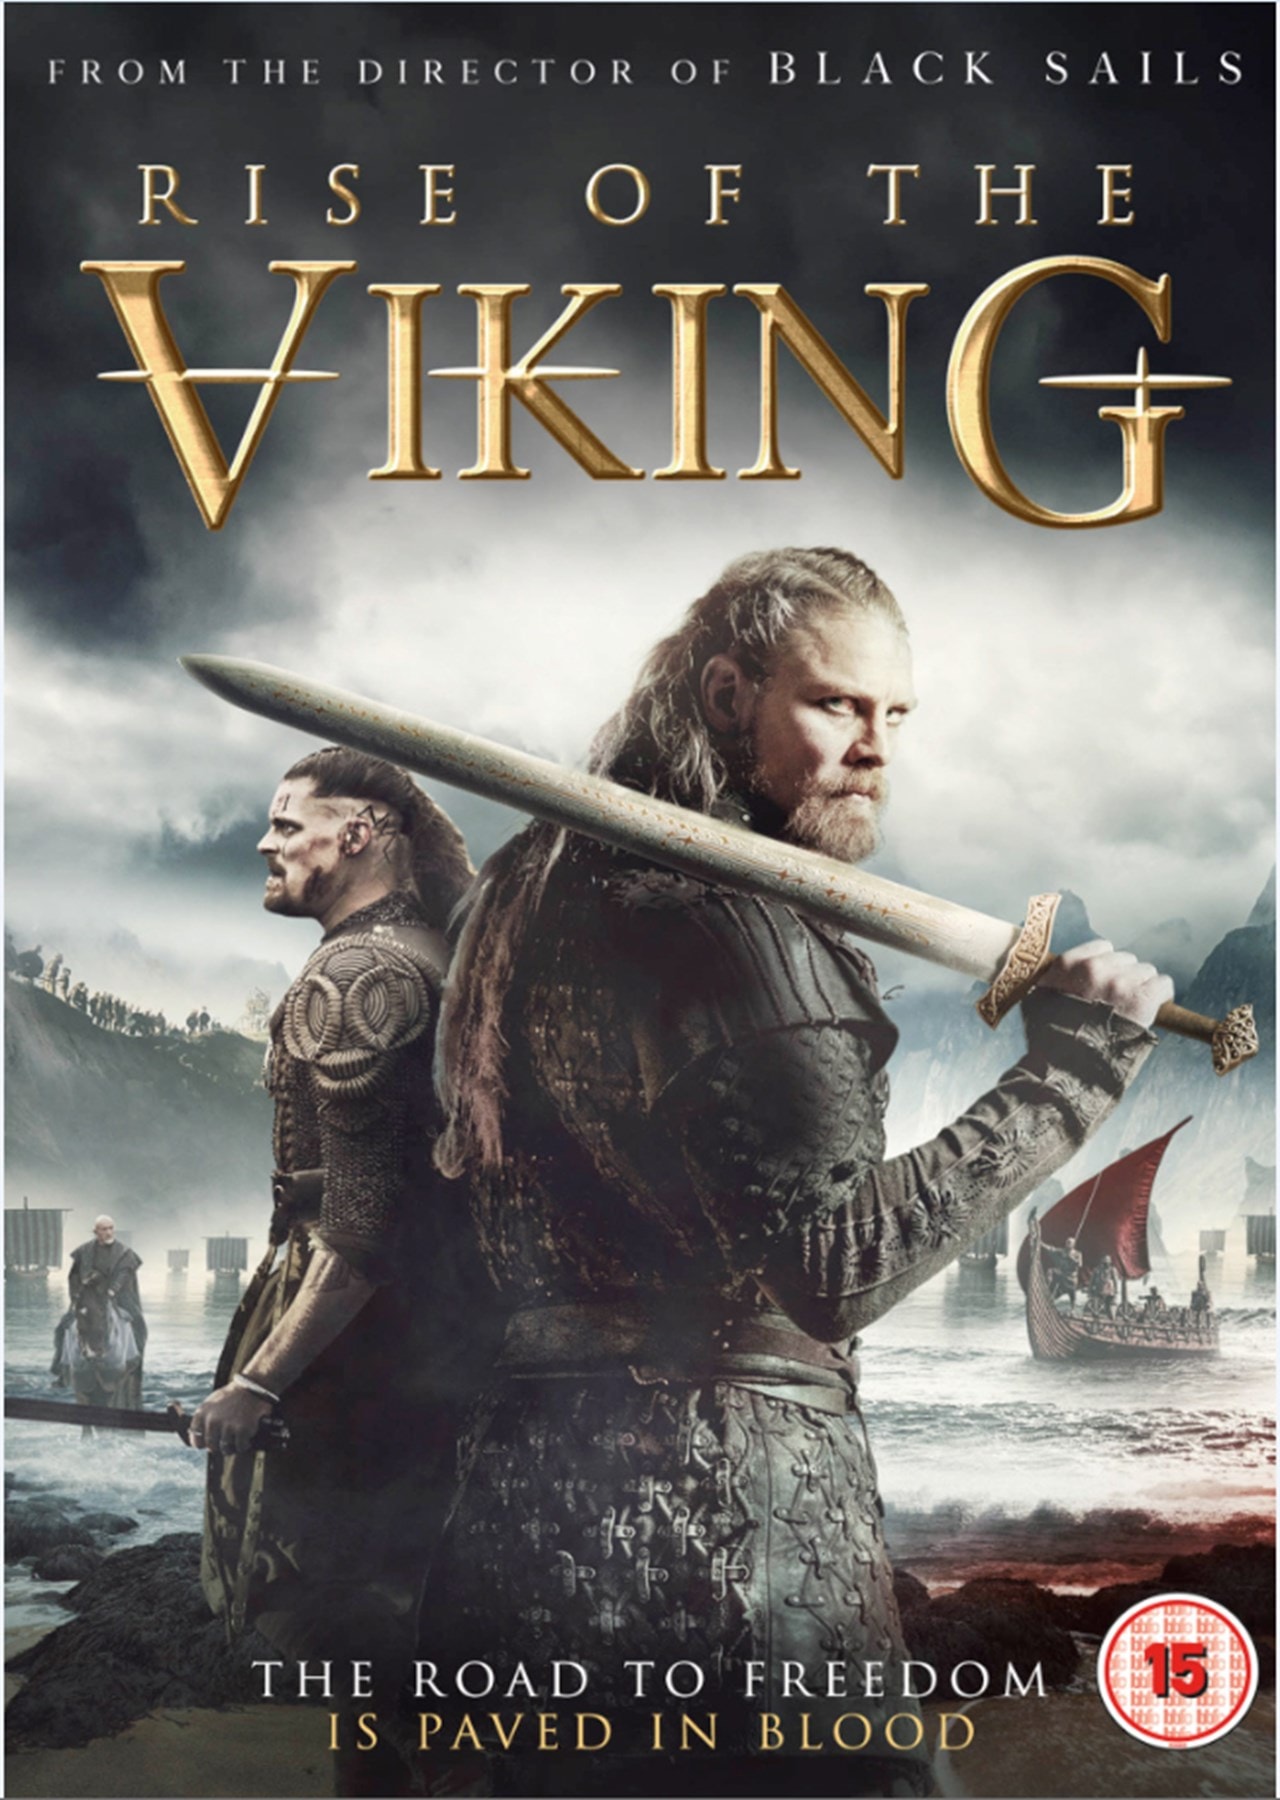 Rise of the Viking DVD Free shipping over £20 HMV Store